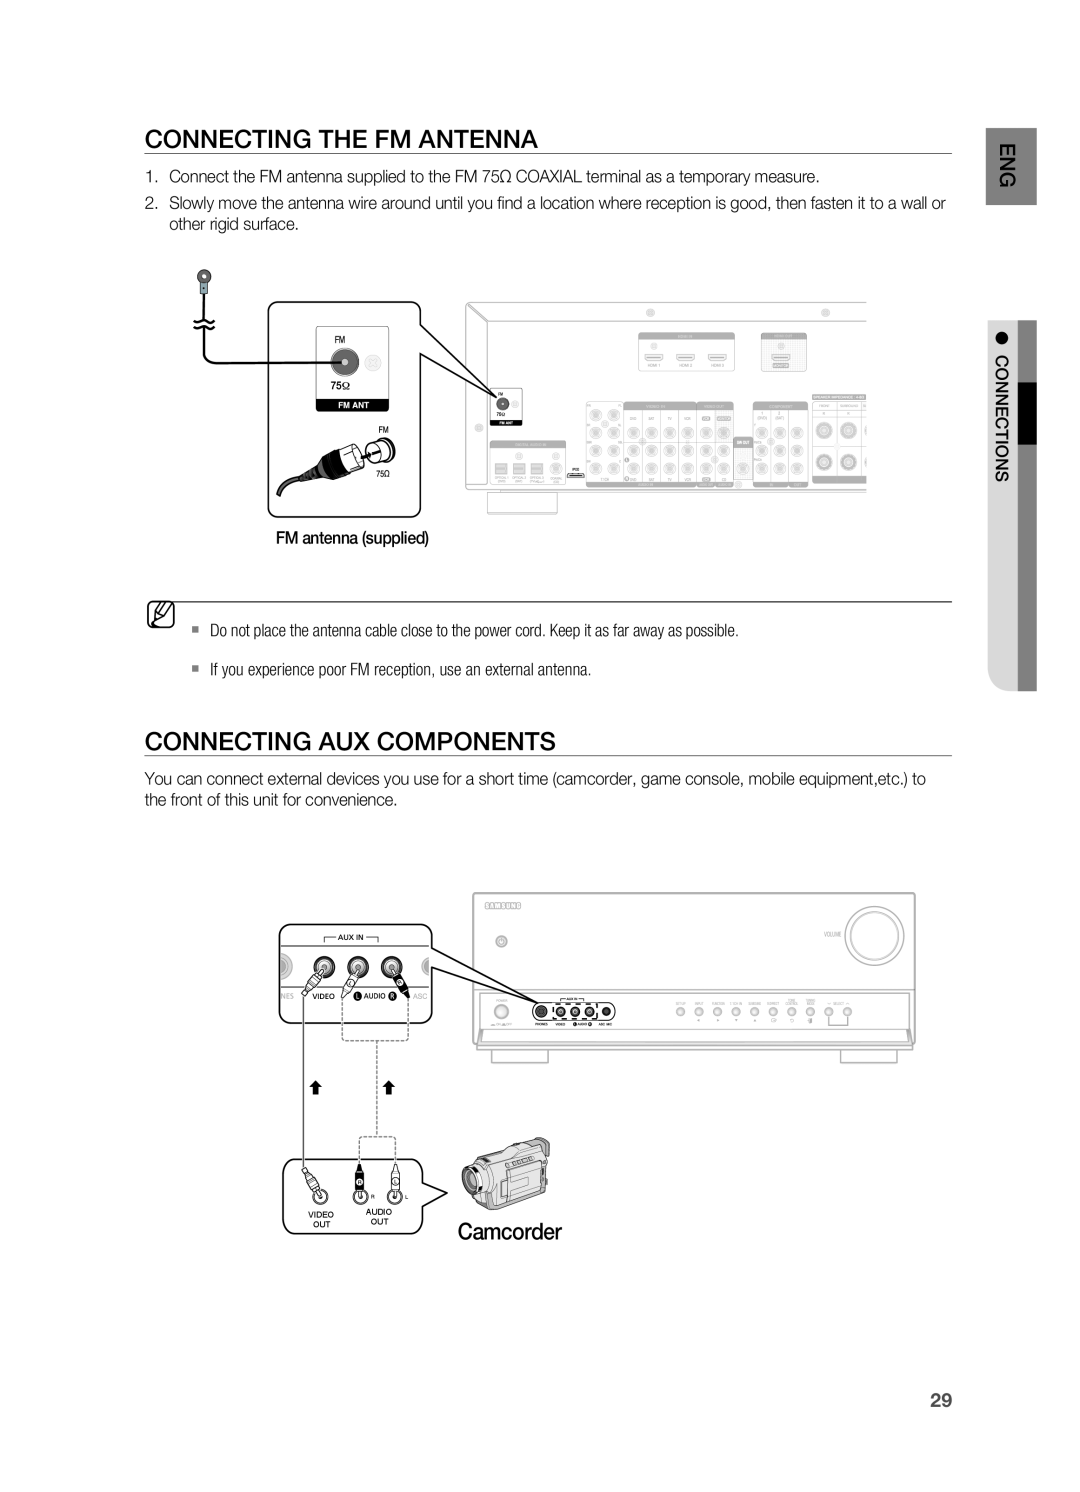 Samsung HT-AS730S user manual COnneCting tHe fm antenna, COnneCting aUX COmpOnentS, Camcorder 